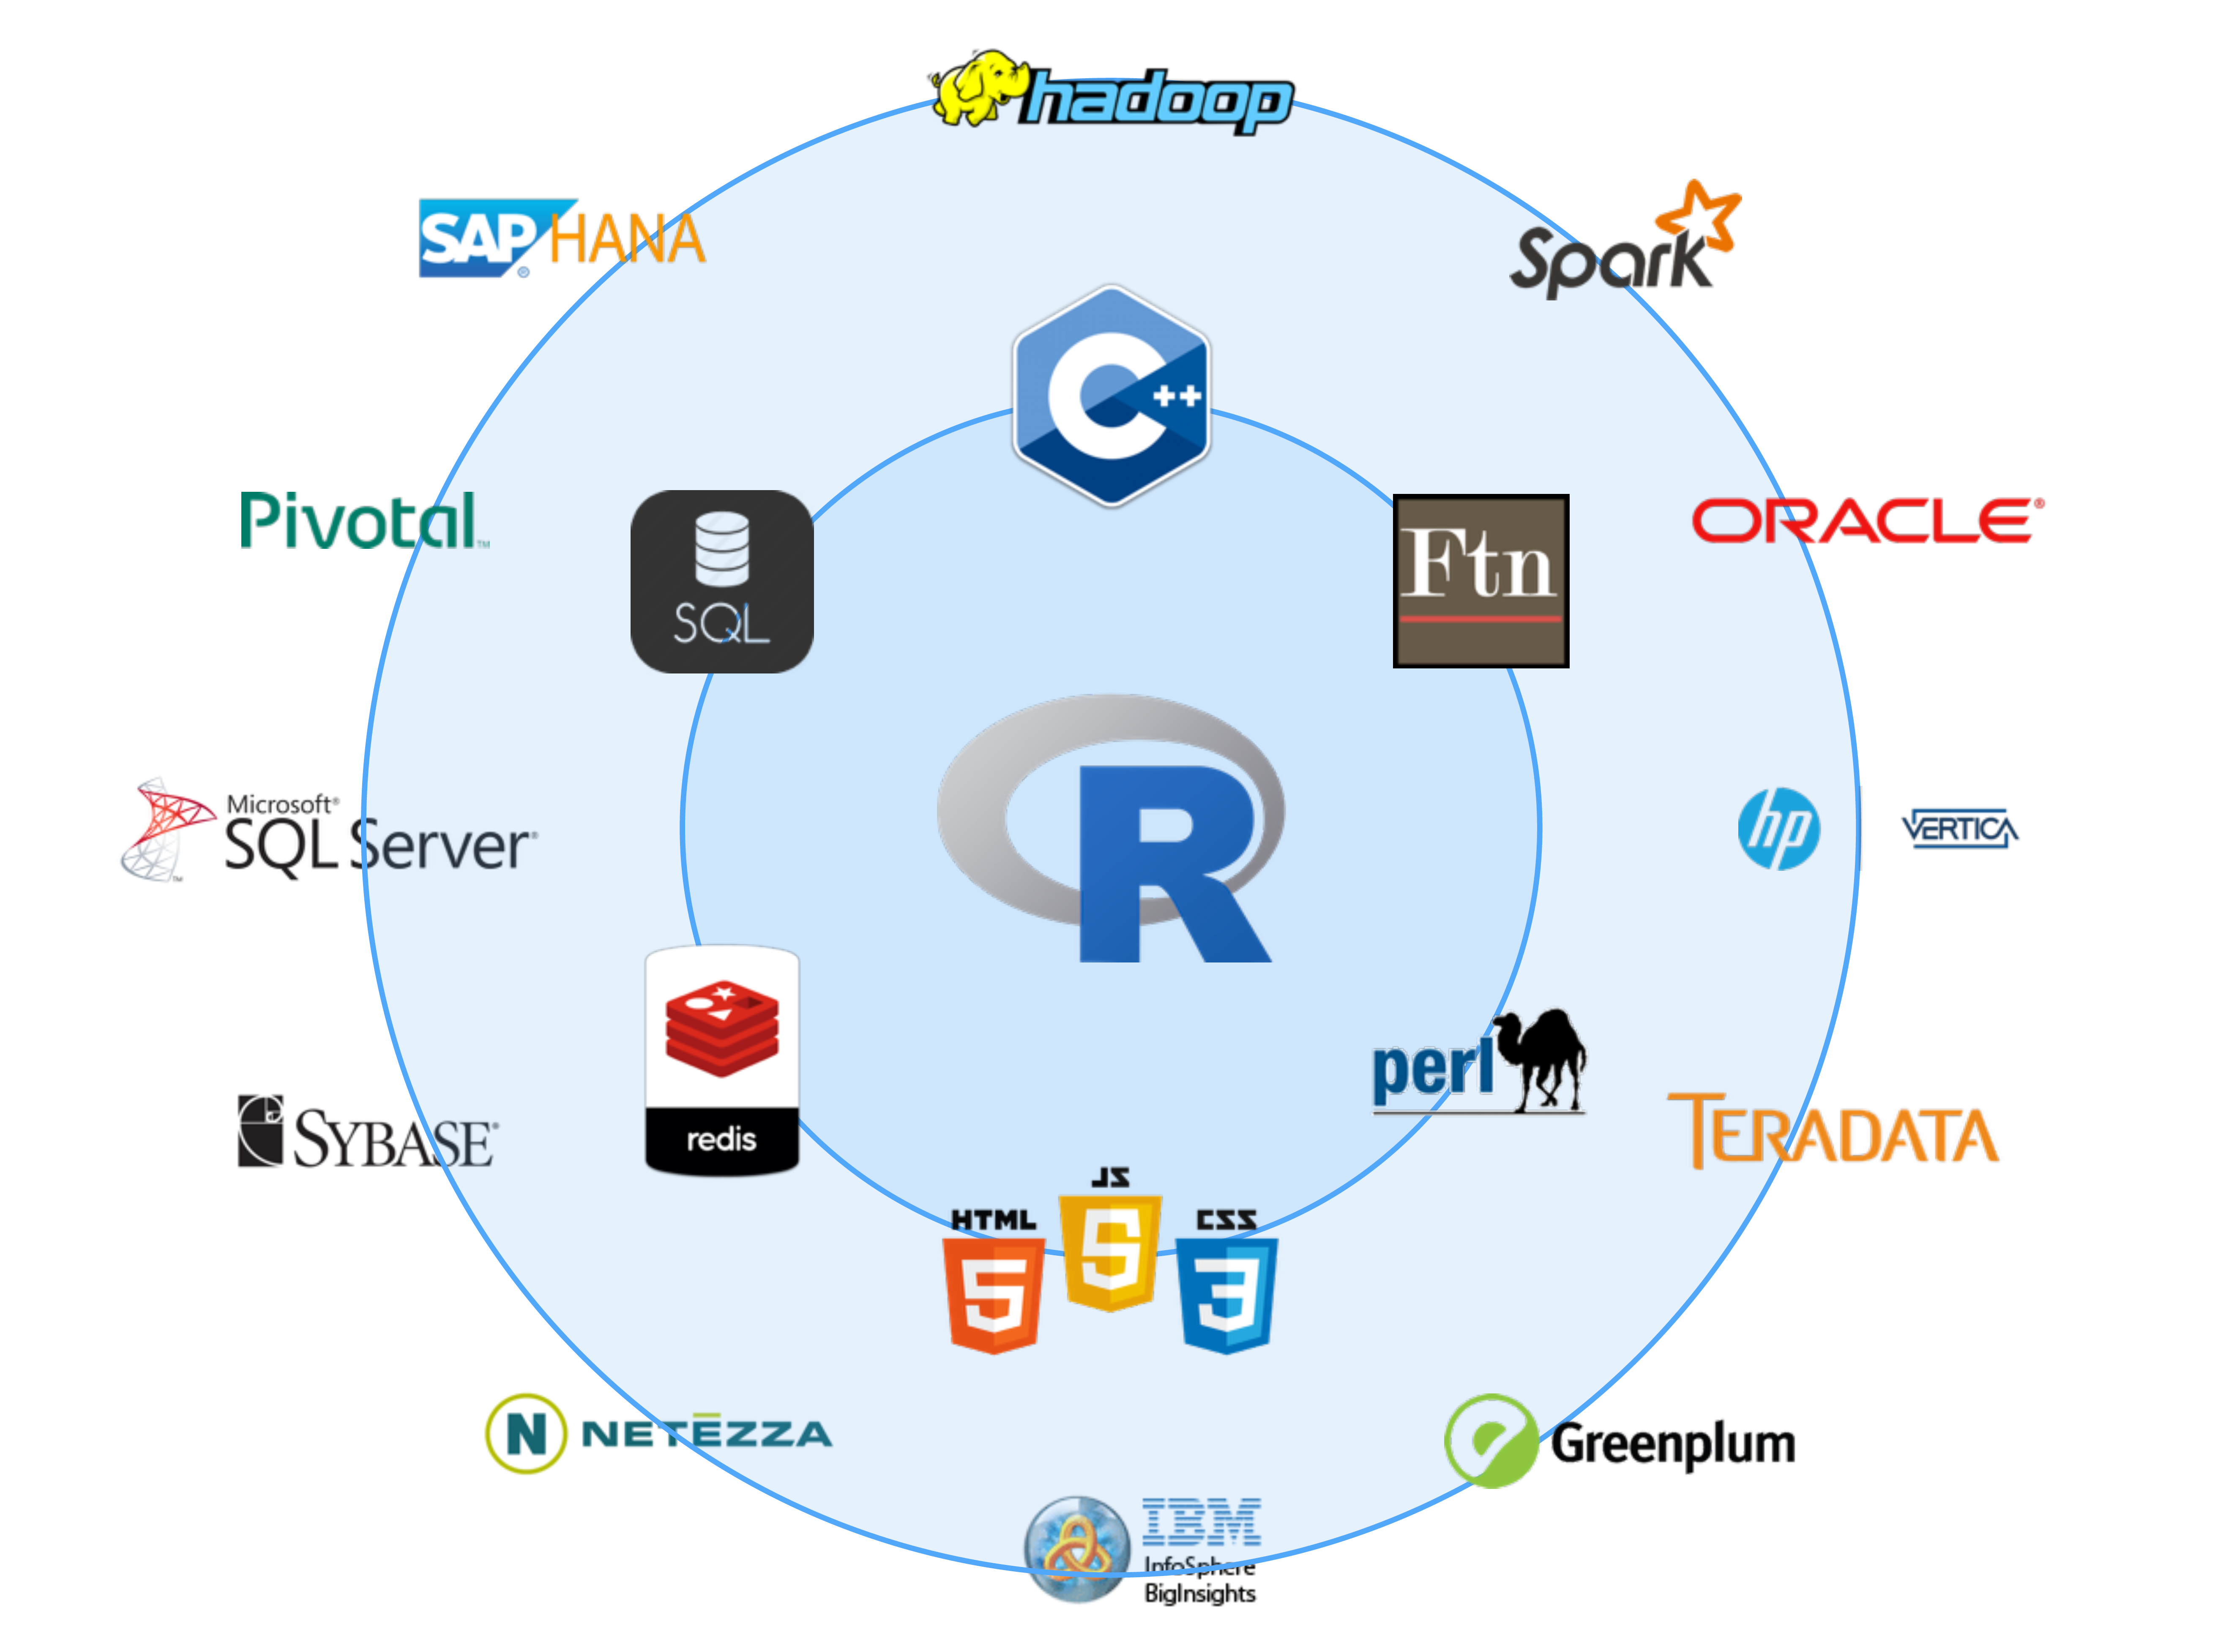 Other big data programs integrated with R